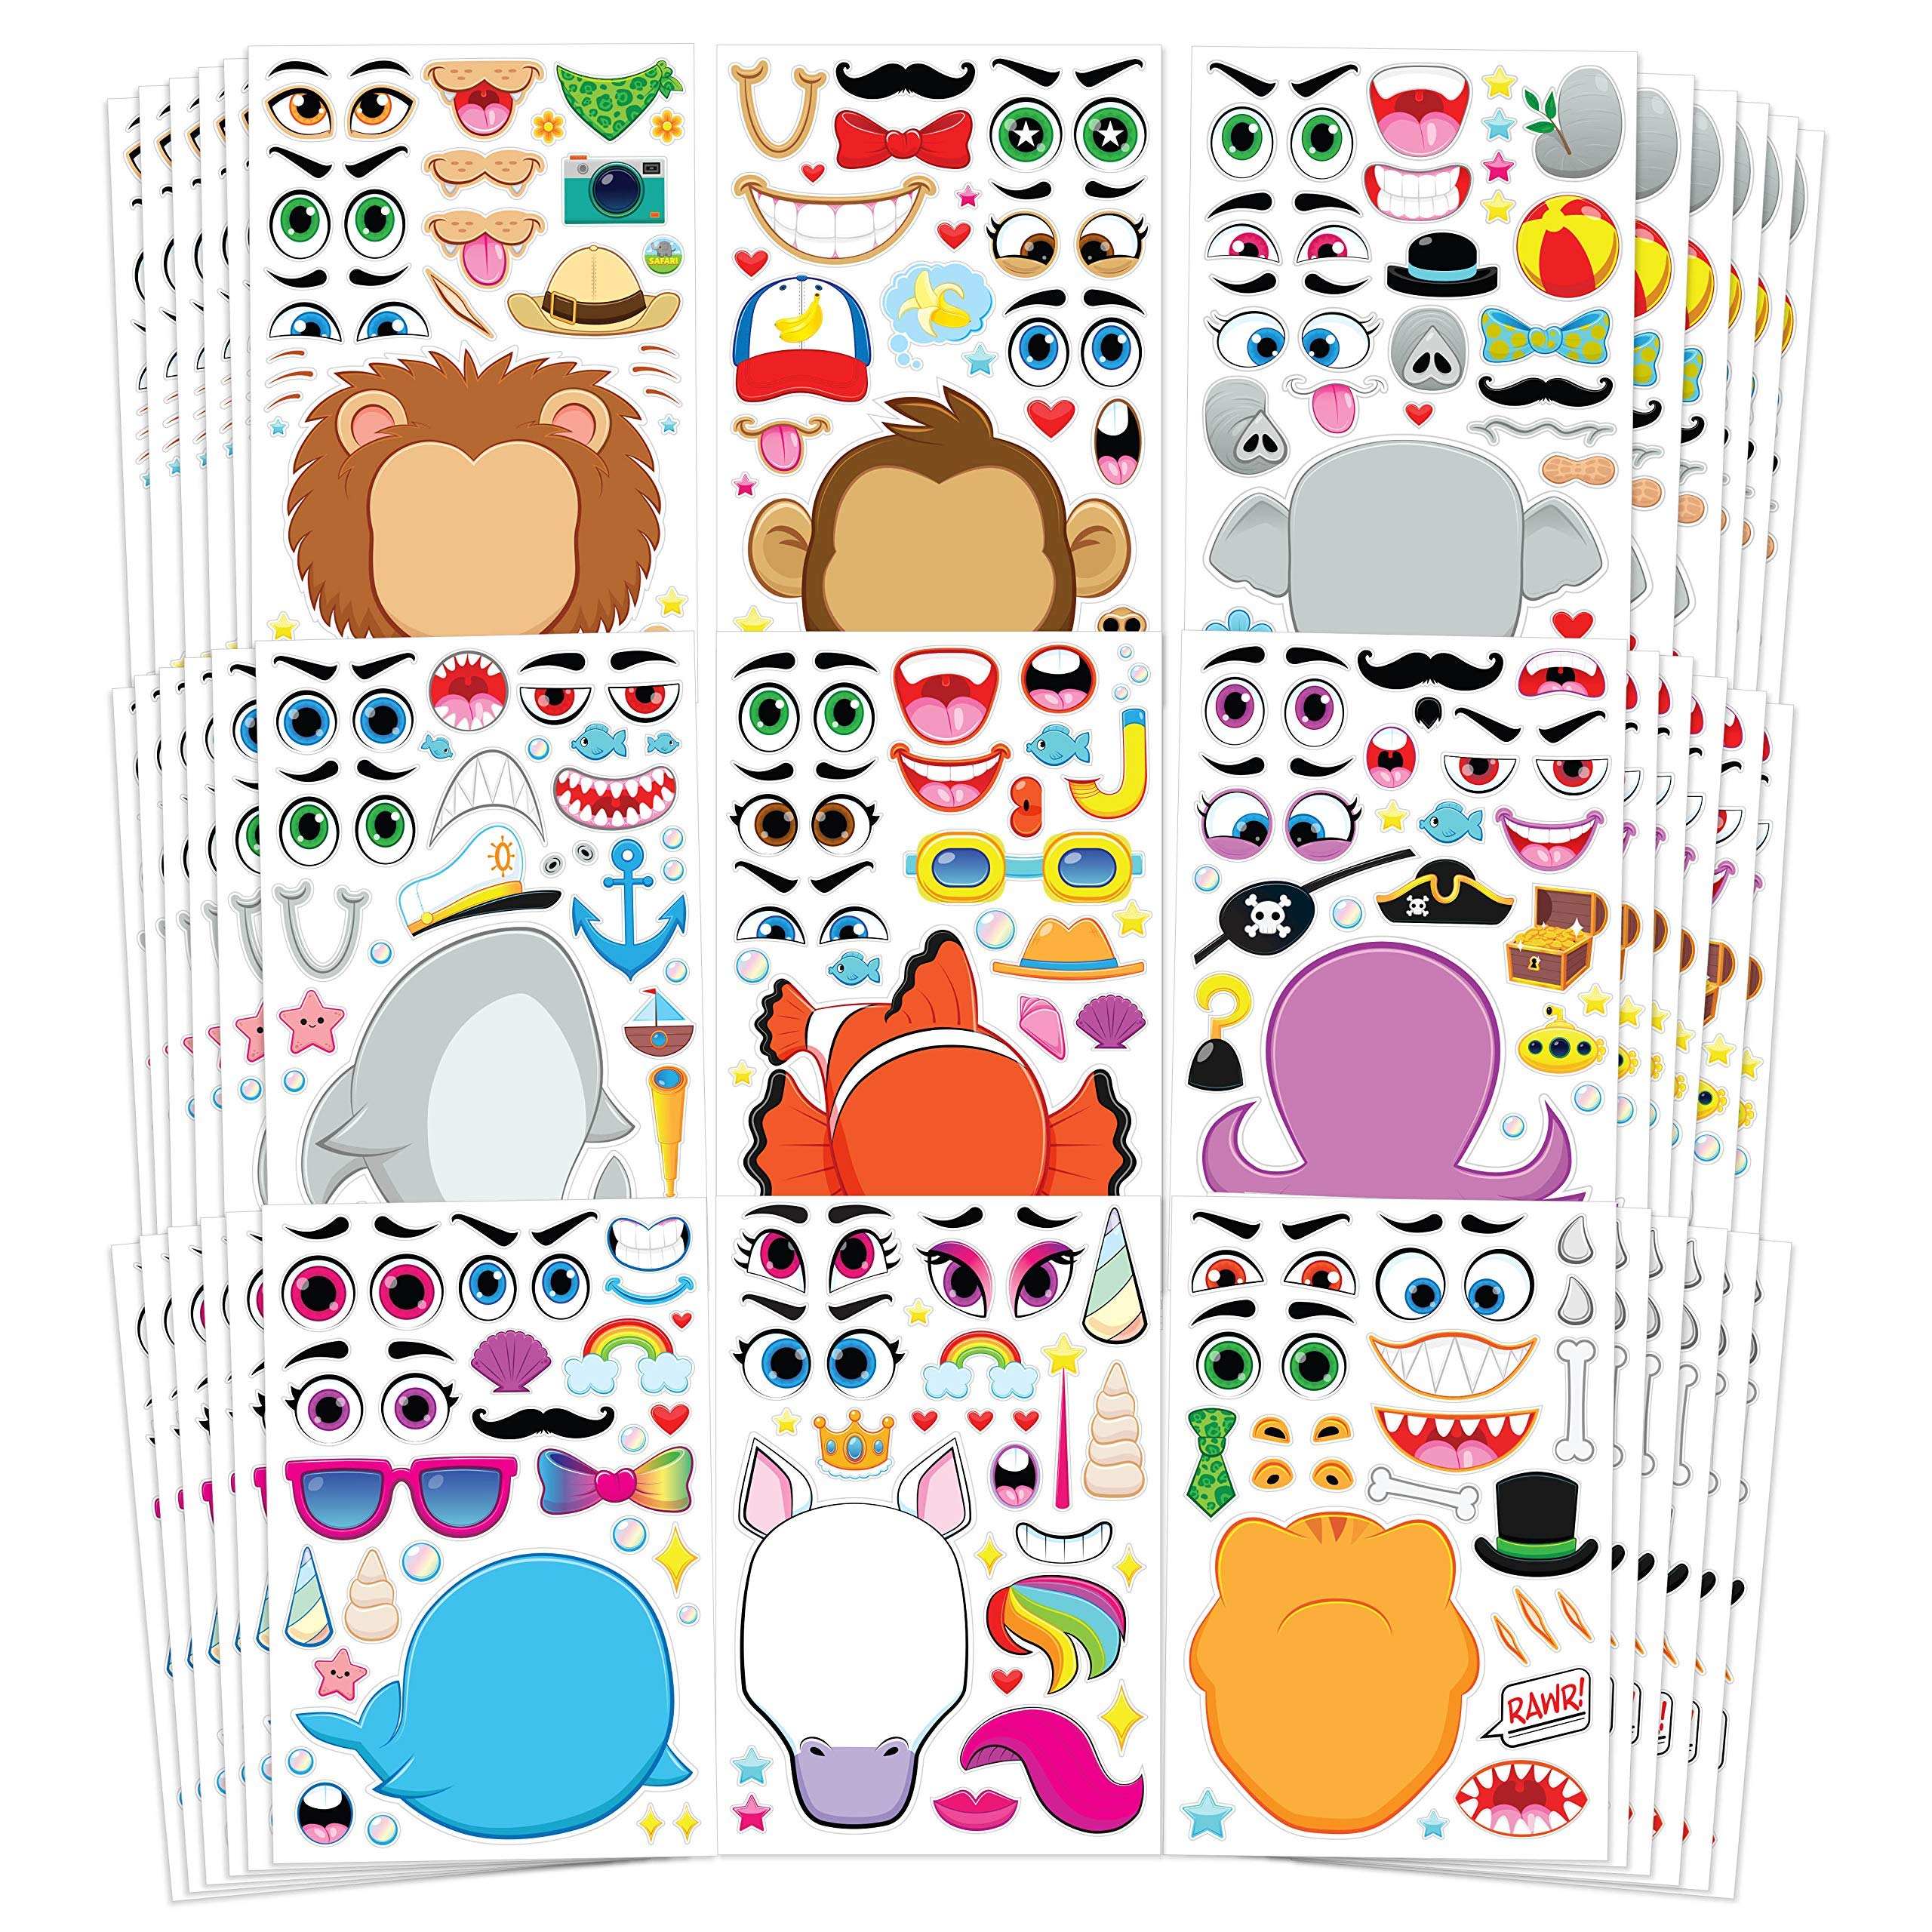 JOYIN 36 PCS 9.8”x6.7" Make-a-face Sticker Sheets Make Your Own Animal Mix and Match Sticker Sheets with Safaris, Sea and Fantasy Animals Kids Party Favor Supplies Craft